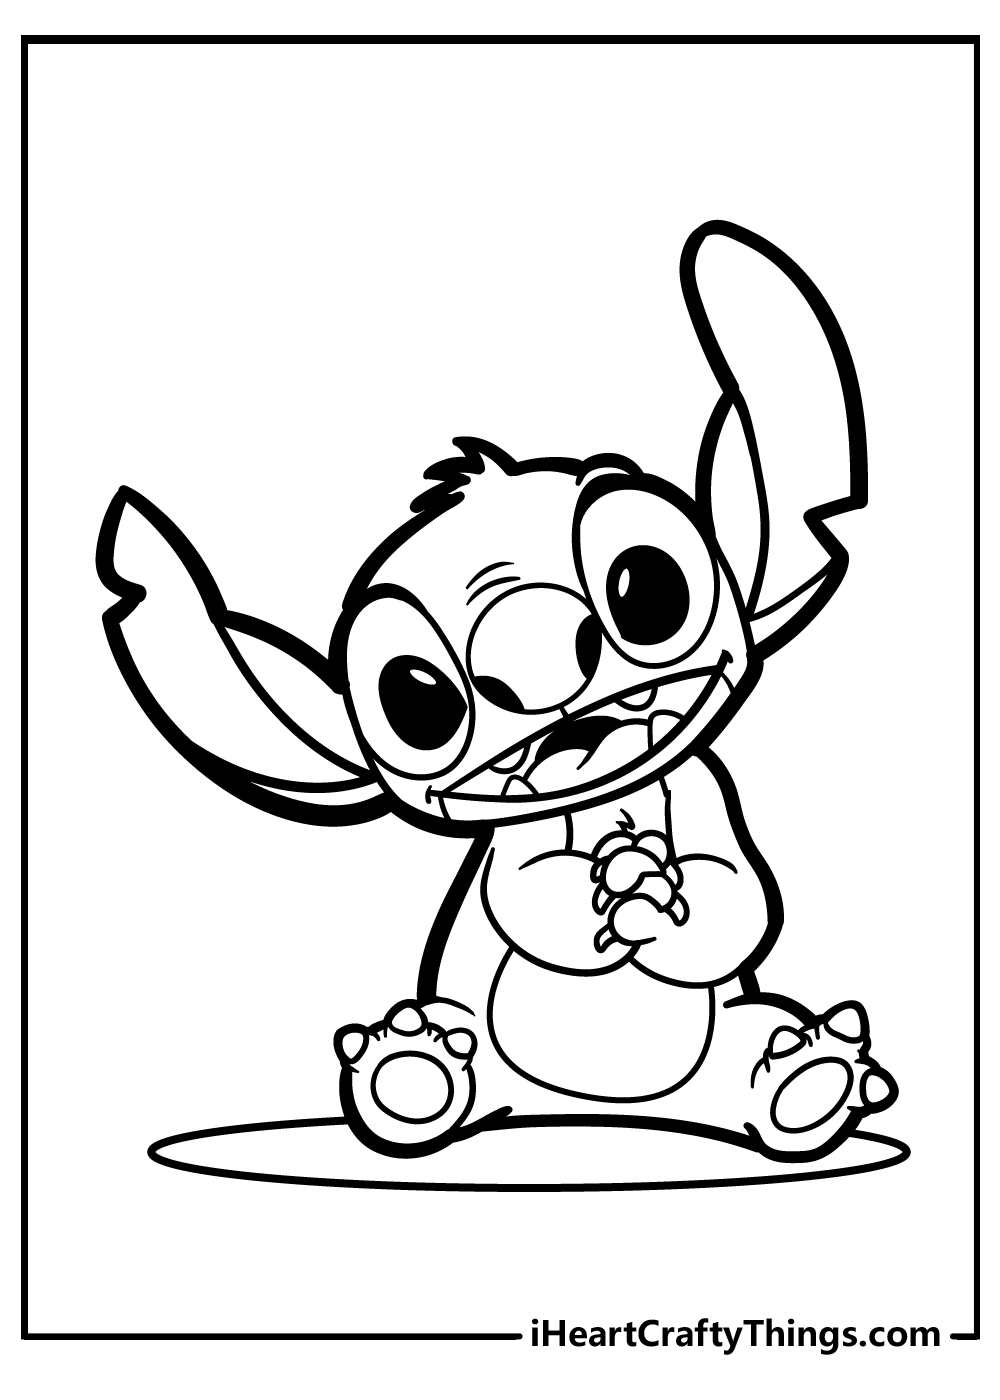 Lilo & Stitch Coloring Pages (100% Free Printables)